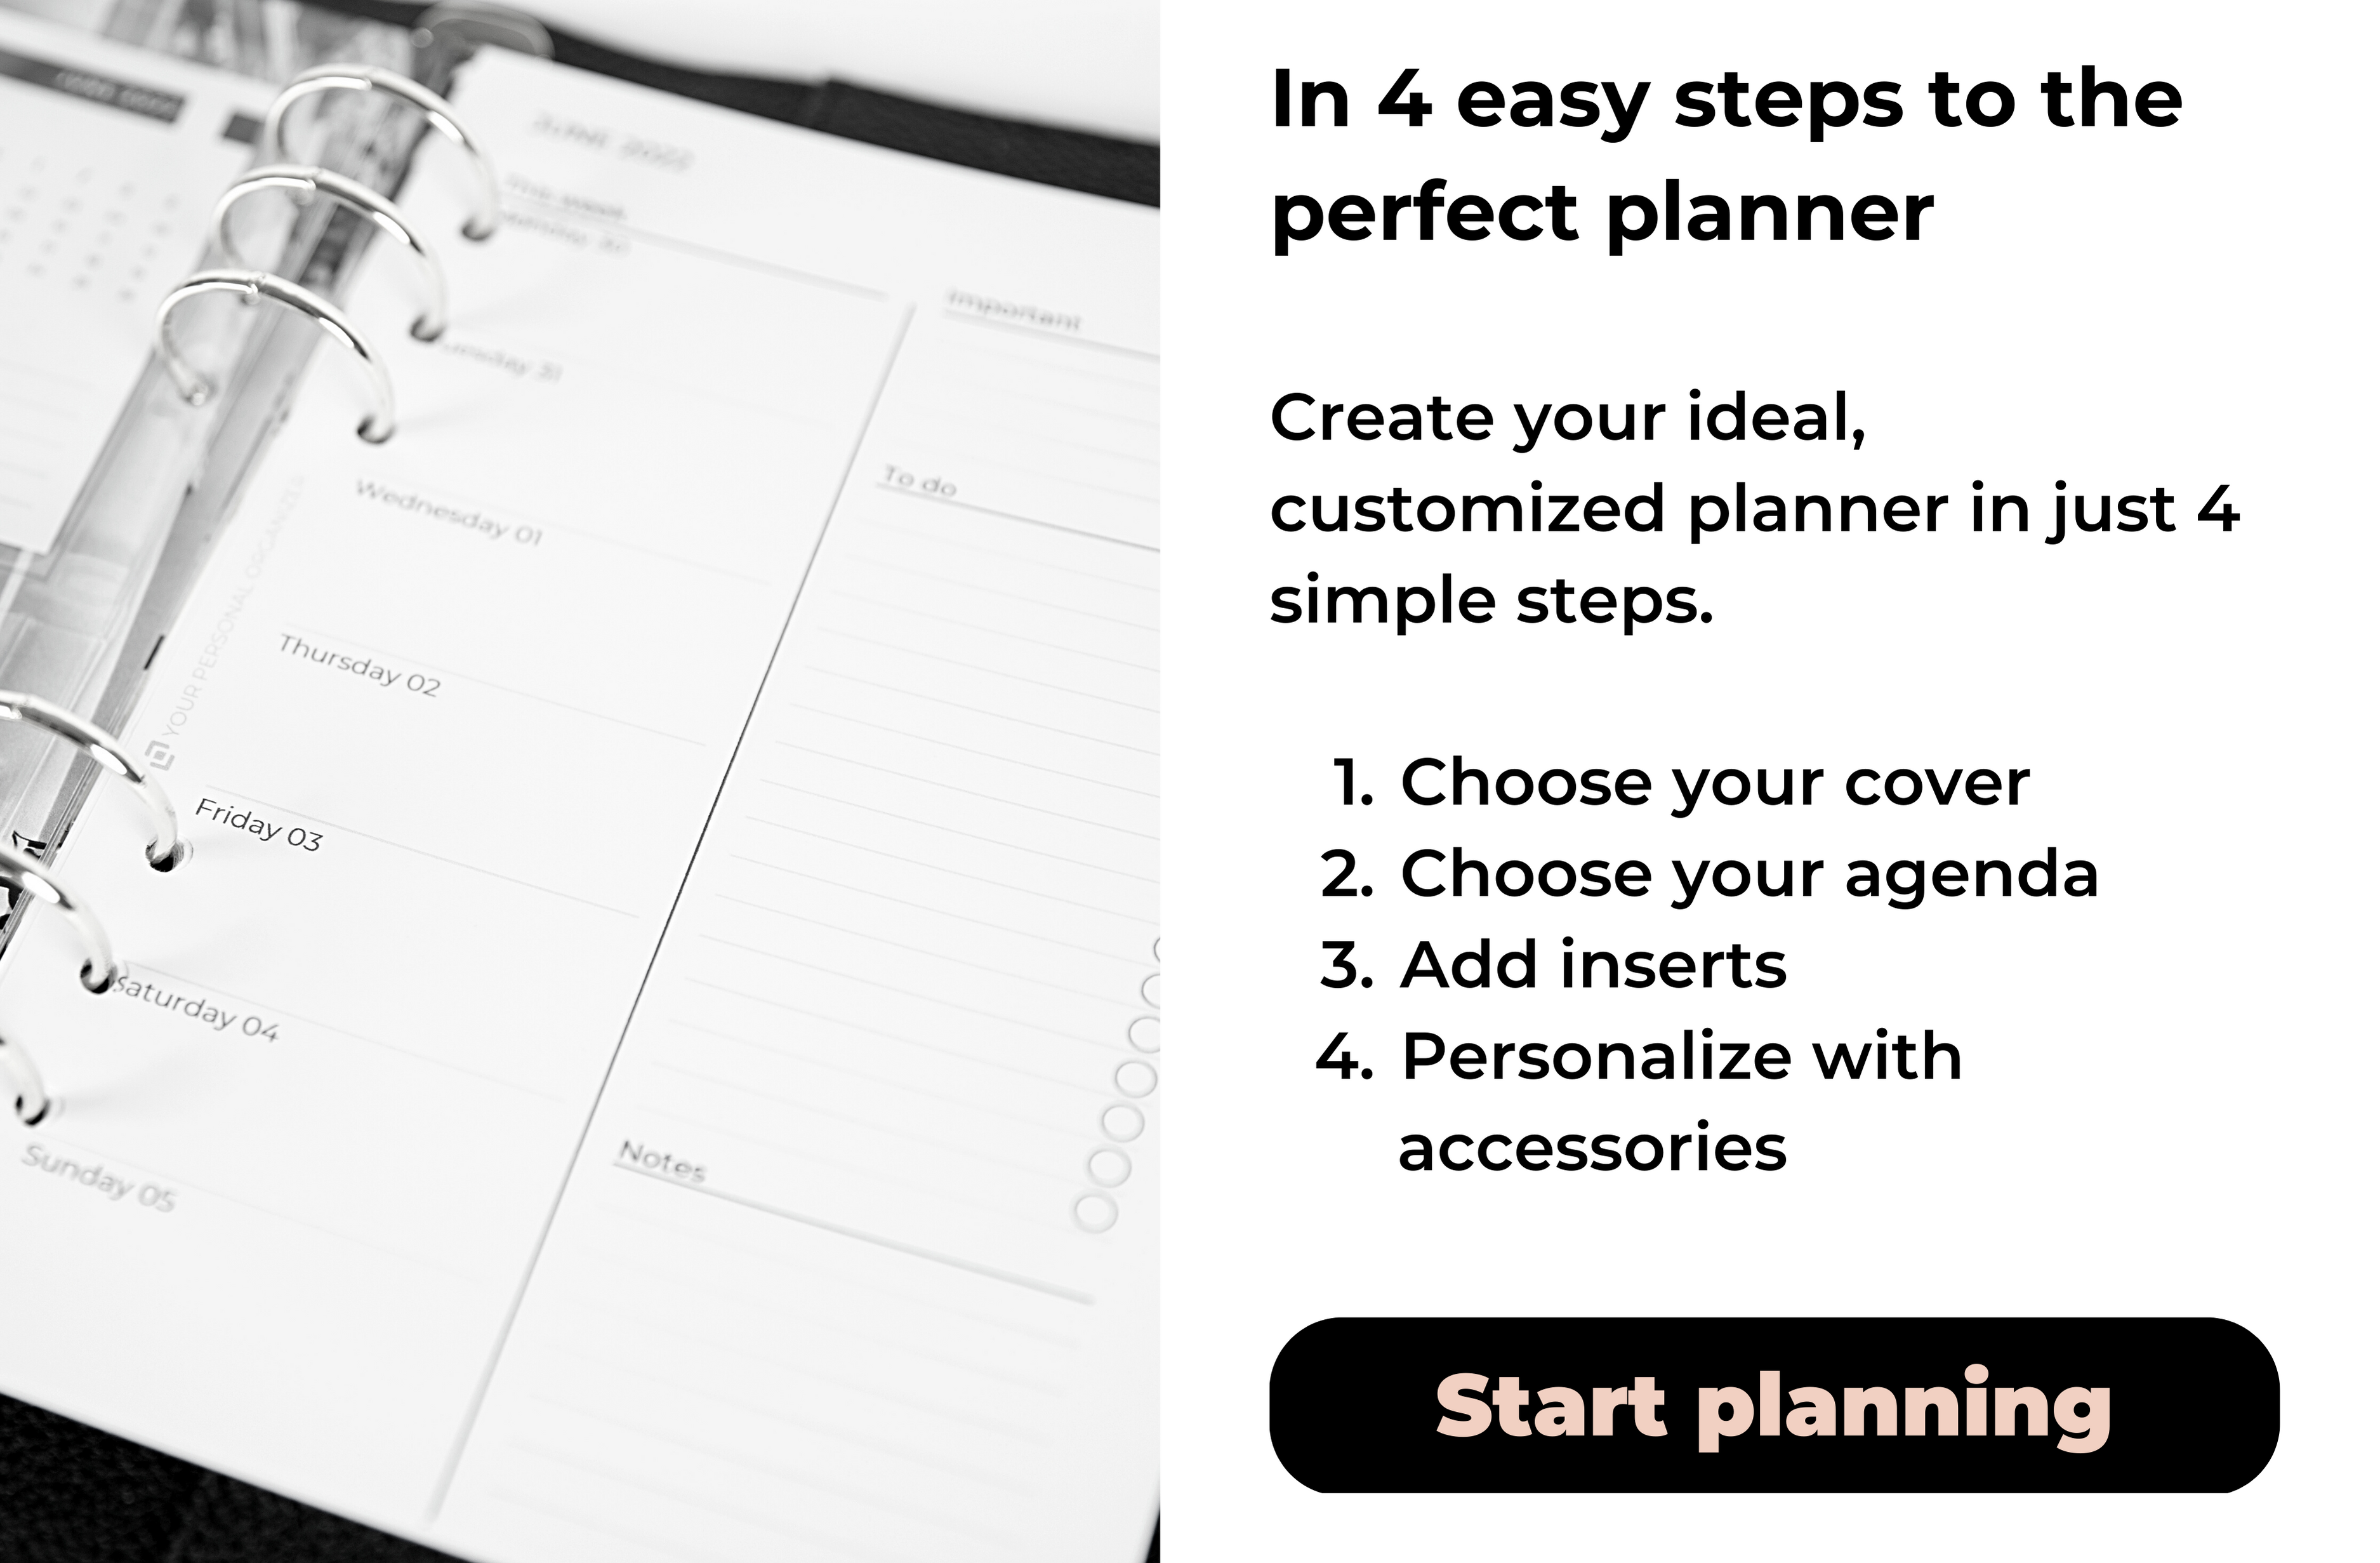 Discover Your Personal Organizer: Create Your Perfect Planner!